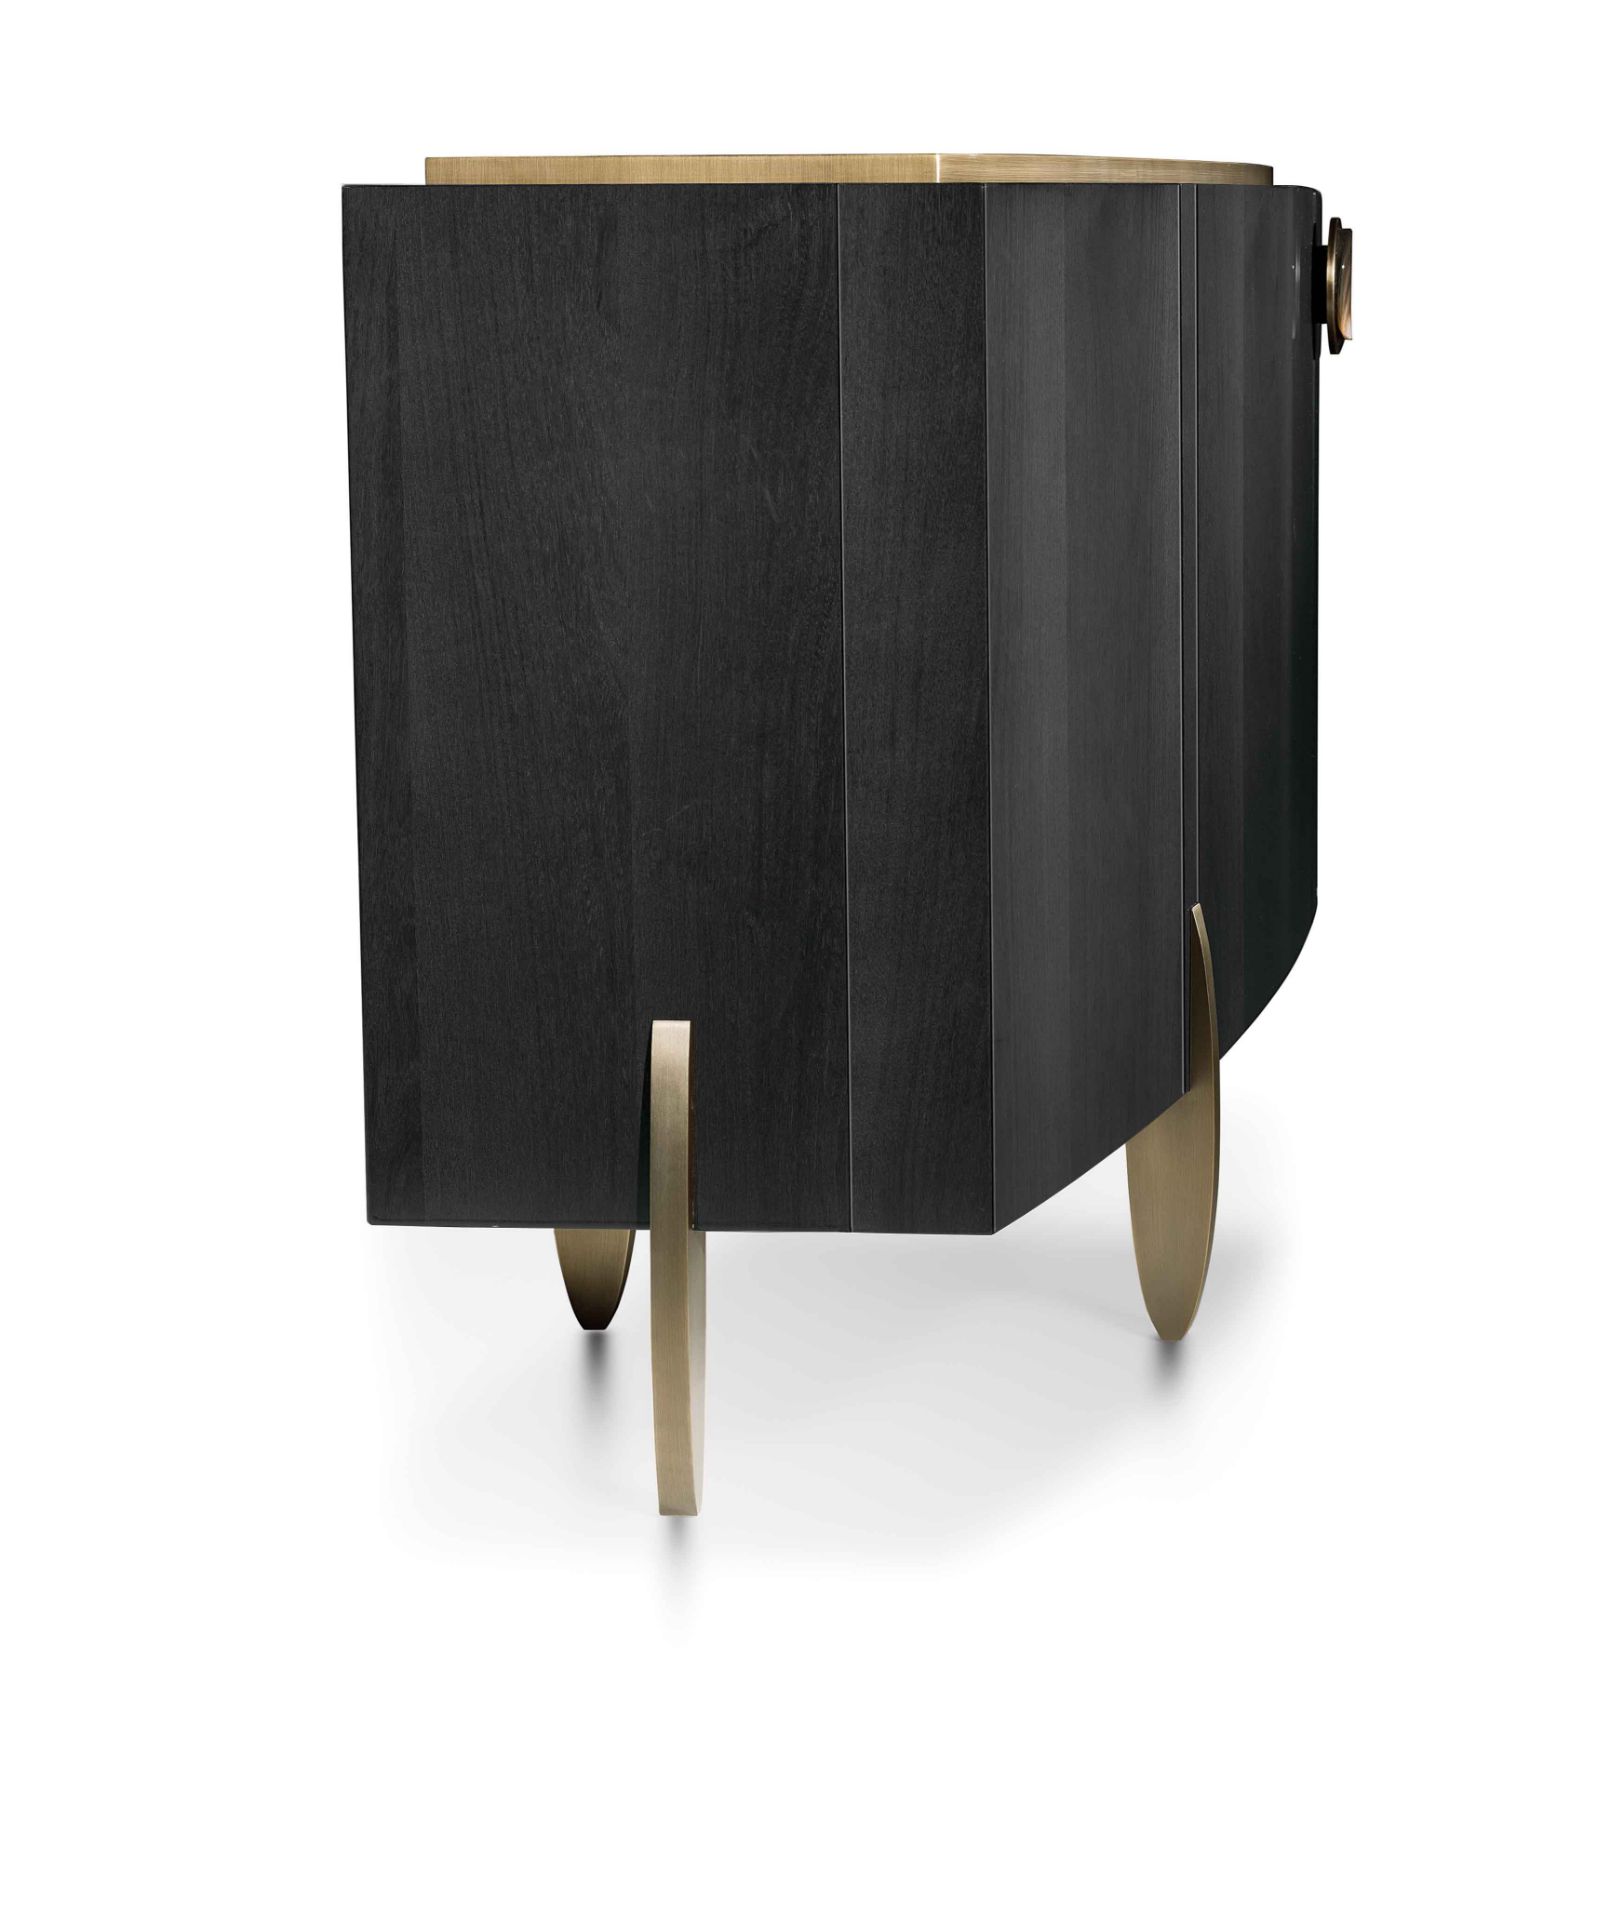 Fashion Affair Large Sideboard by Telemaco for Malerba The Buffet, for the living room, is shaped by - Bild 7 aus 25